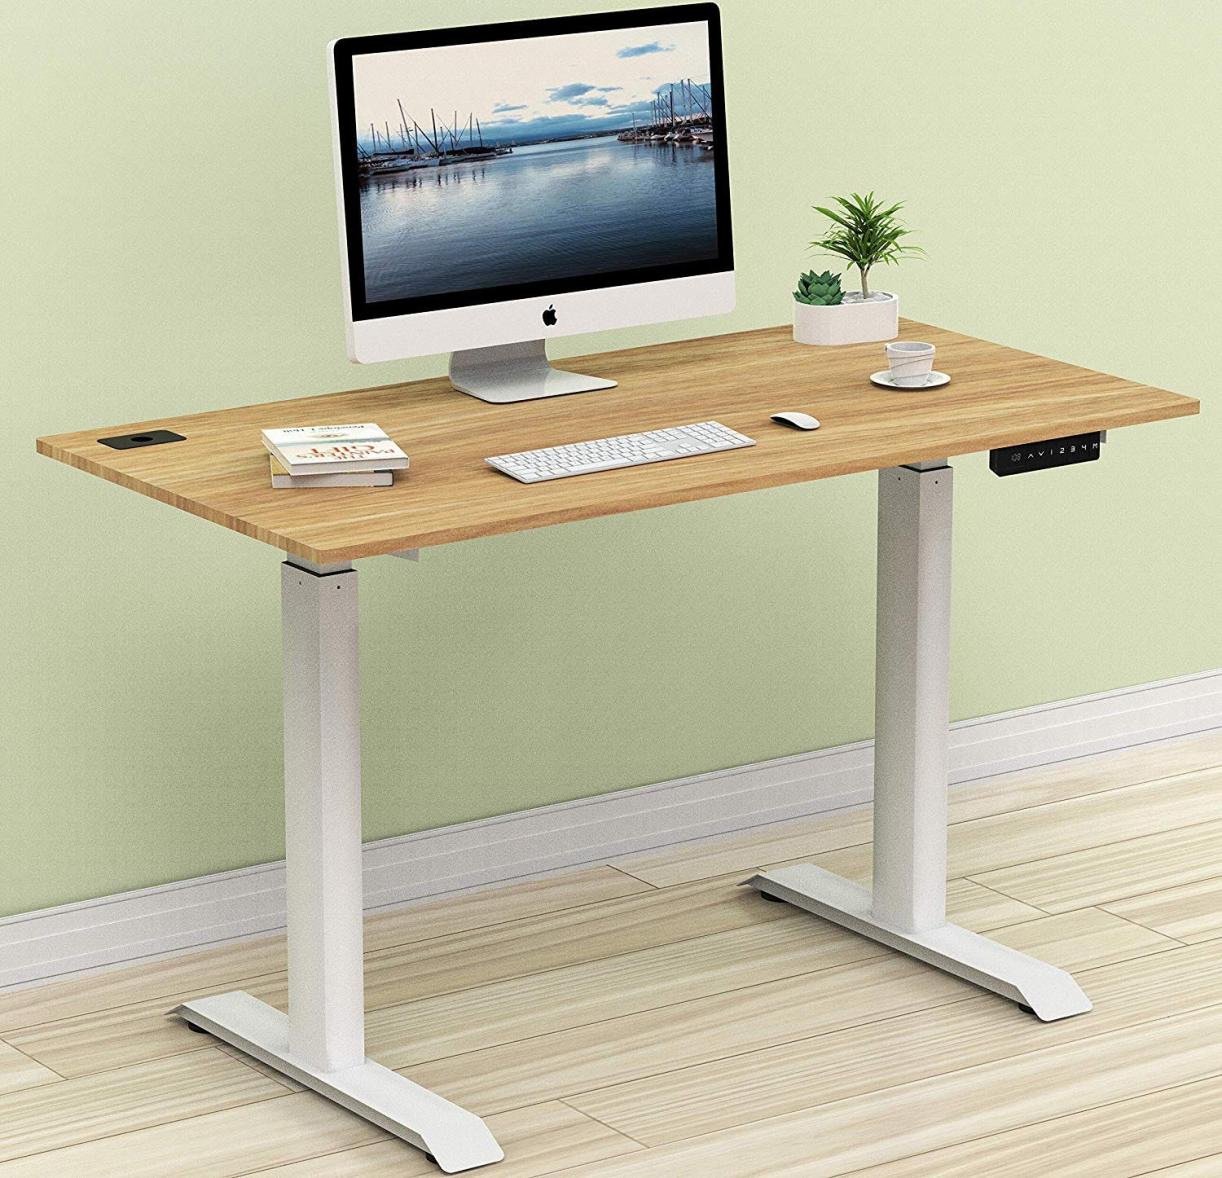 What Are the Health Benefits of Using a Standing Desk?